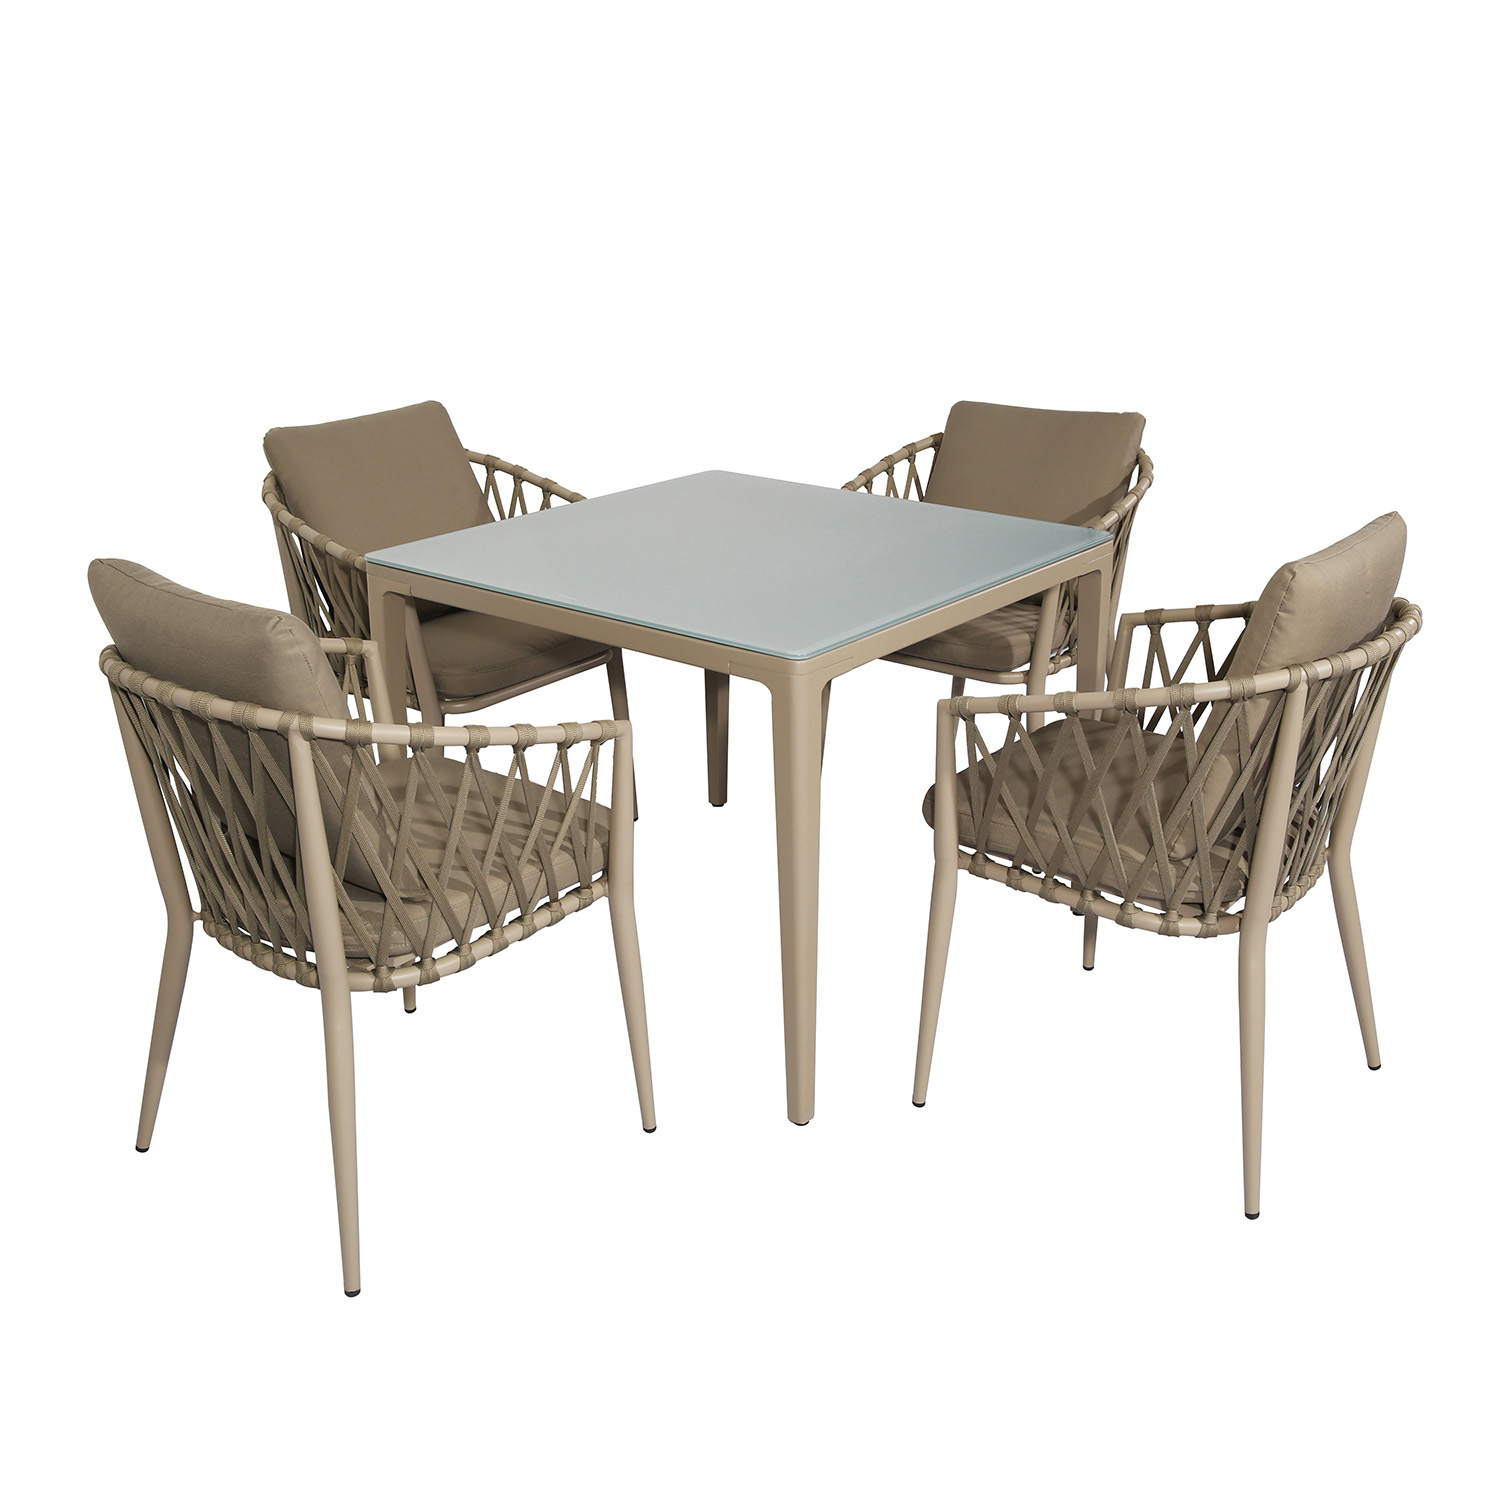 CZ014 Simple Design Outdoor Rope Weaving Dining Table Chair Set